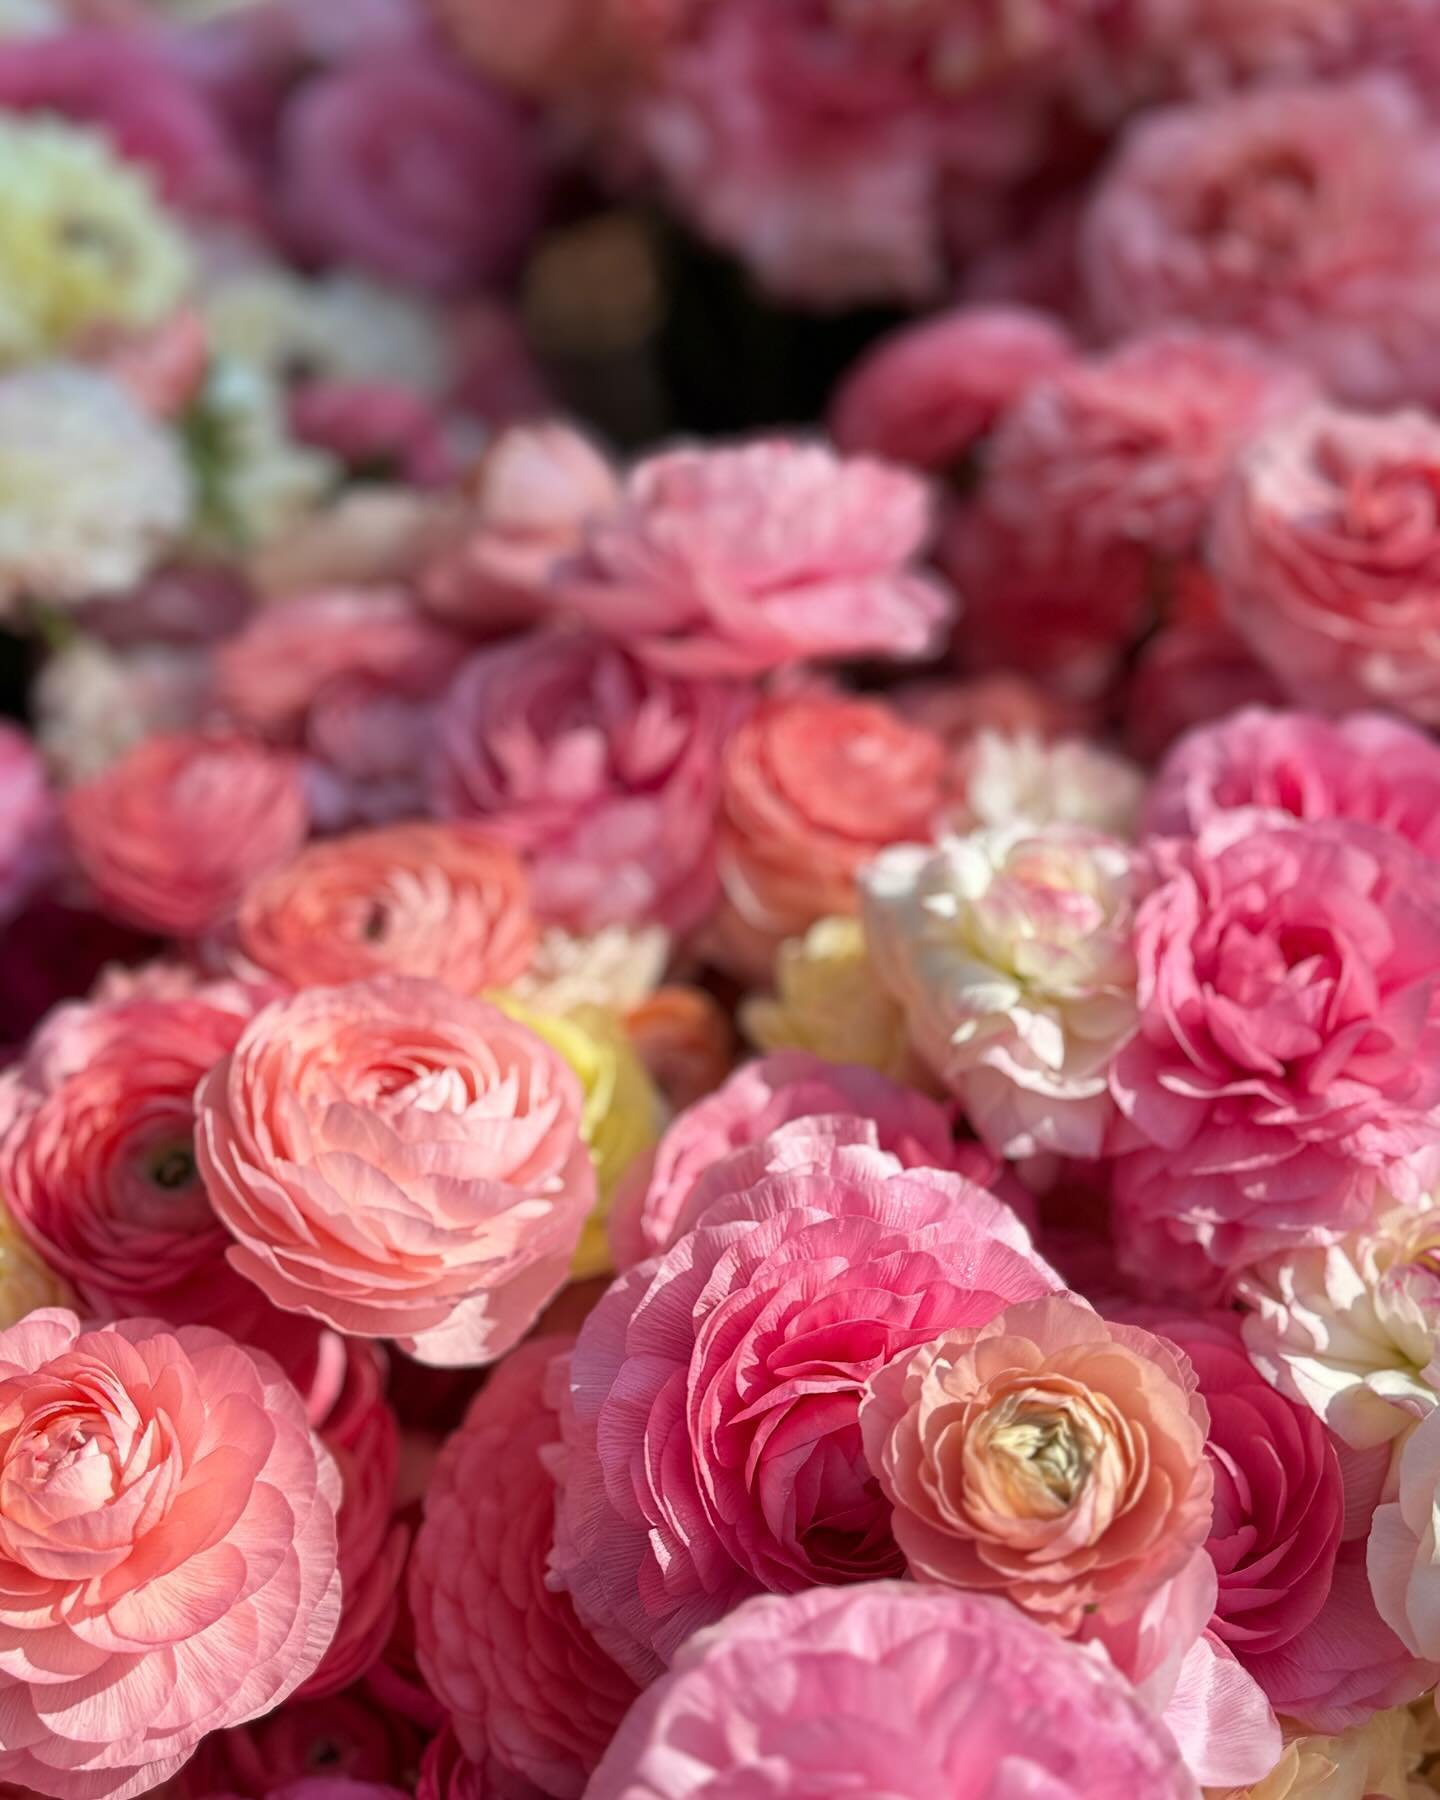 ATTENTION NASHVILLE FLORISTS, DESIGNERS &amp; ranunculus enthusiasts!! 🌸🌸🌸🌸🌸🌸🌸

I&rsquo;m selling my specialty Italian ranunculus blooms (varieties: elegance, grand success, tuareg, nuance) BELOW WHOLESALE by the bunch in order to flip the bed